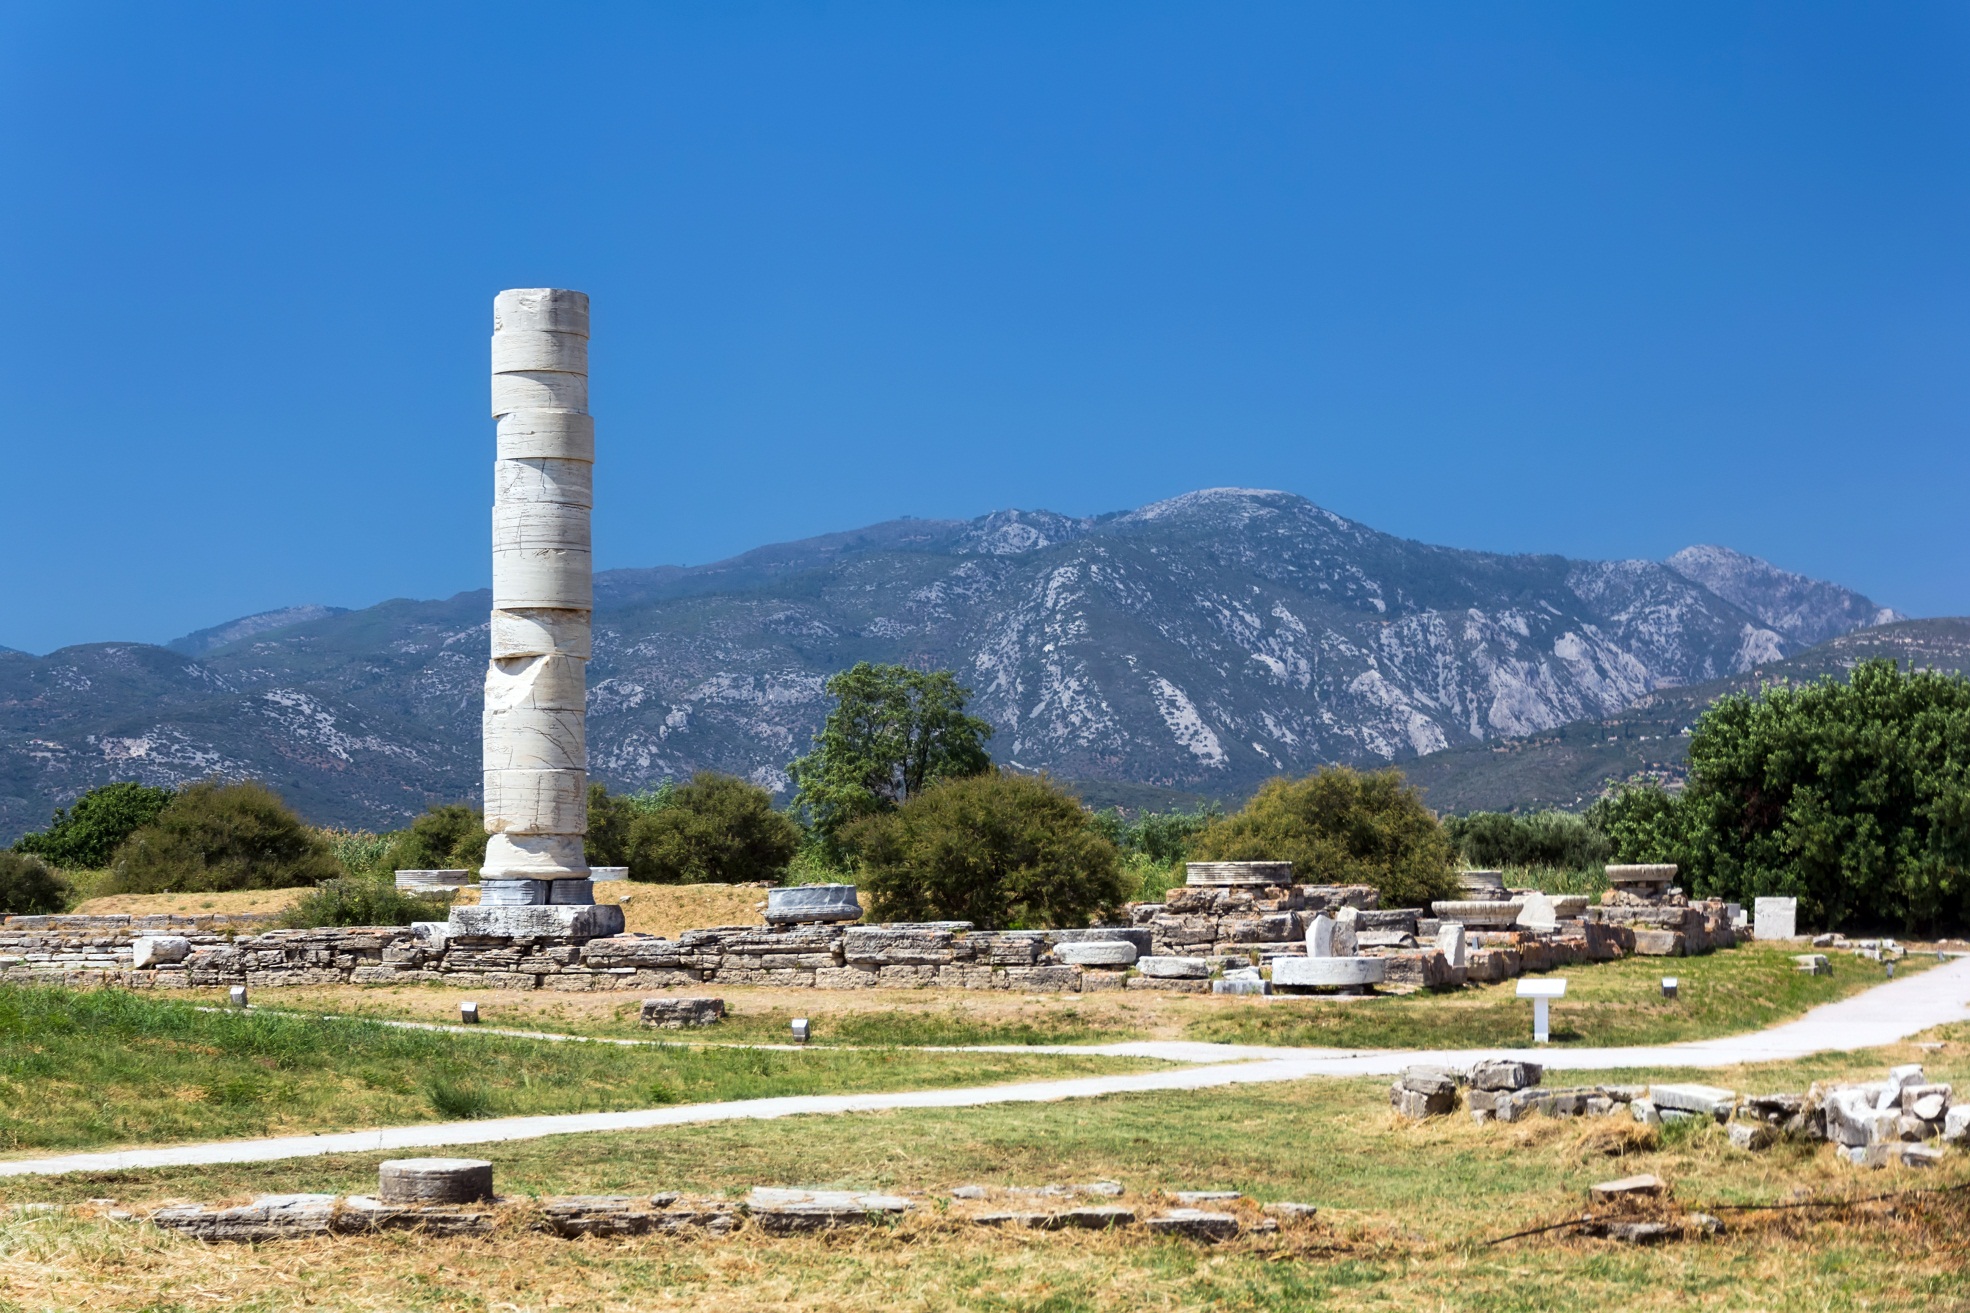 remains of the temple of hera in samos. one column remains standing.